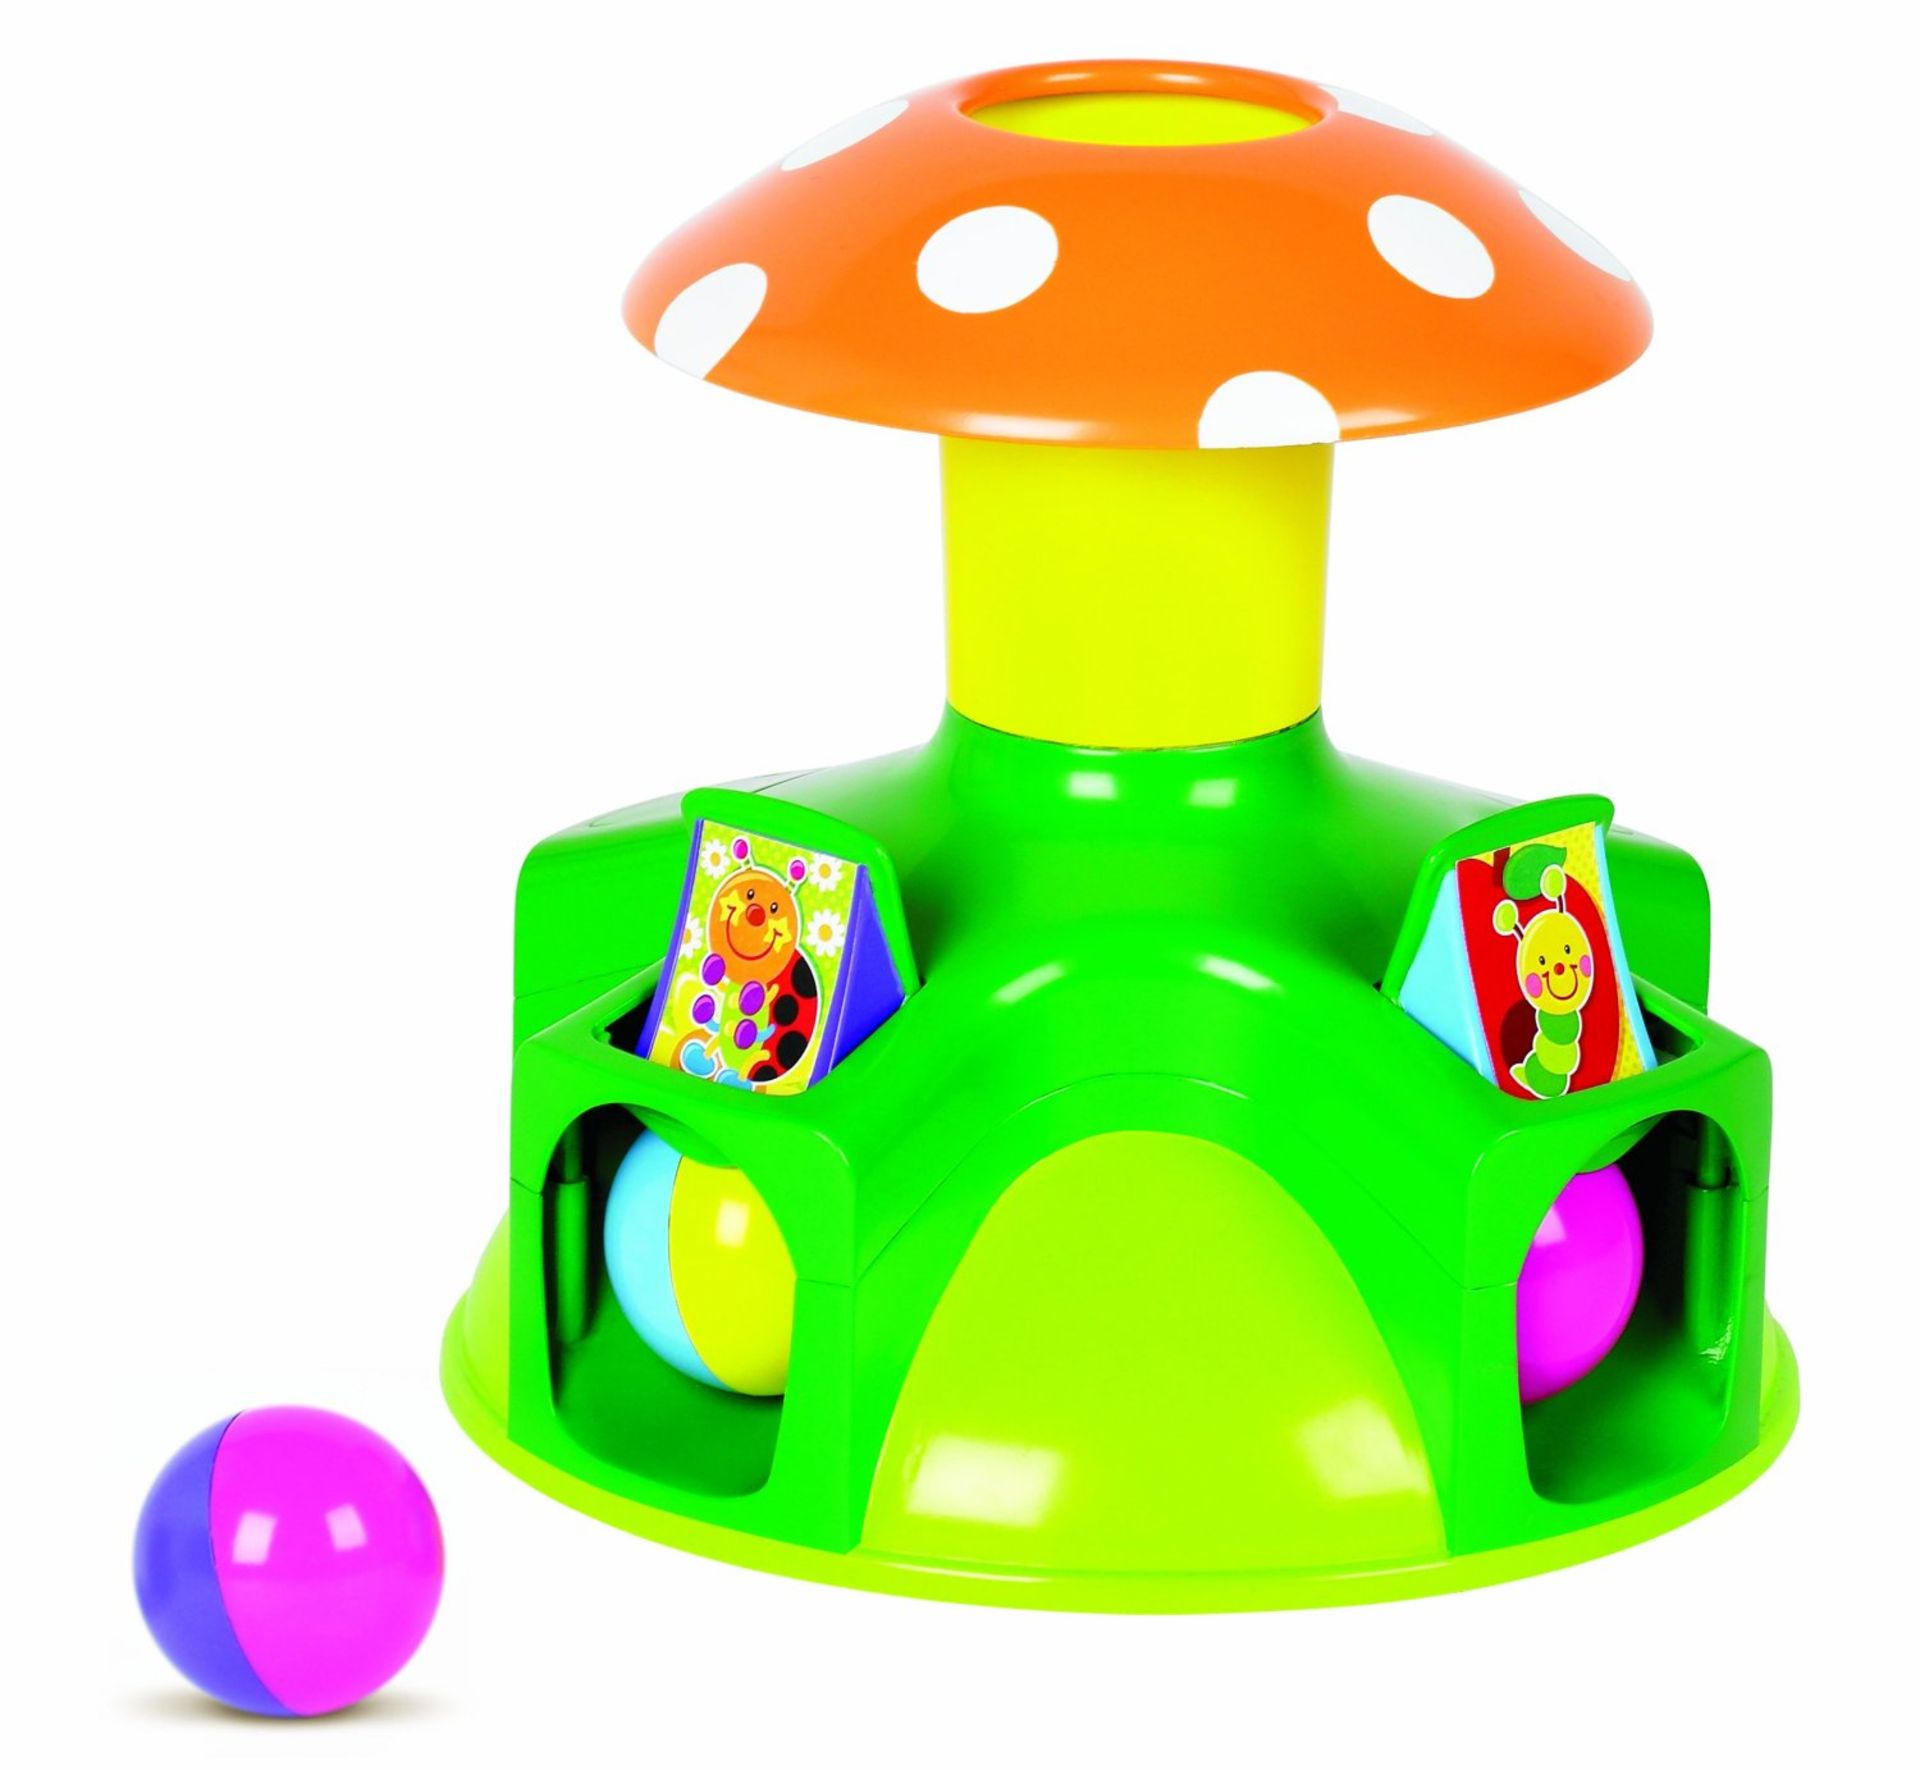 V Grade A Tomy Play To Learn Post'n'Pop 6 Month+ RRP £19.99 X 2 Bid price to be multiplied by Two - Image 2 of 2